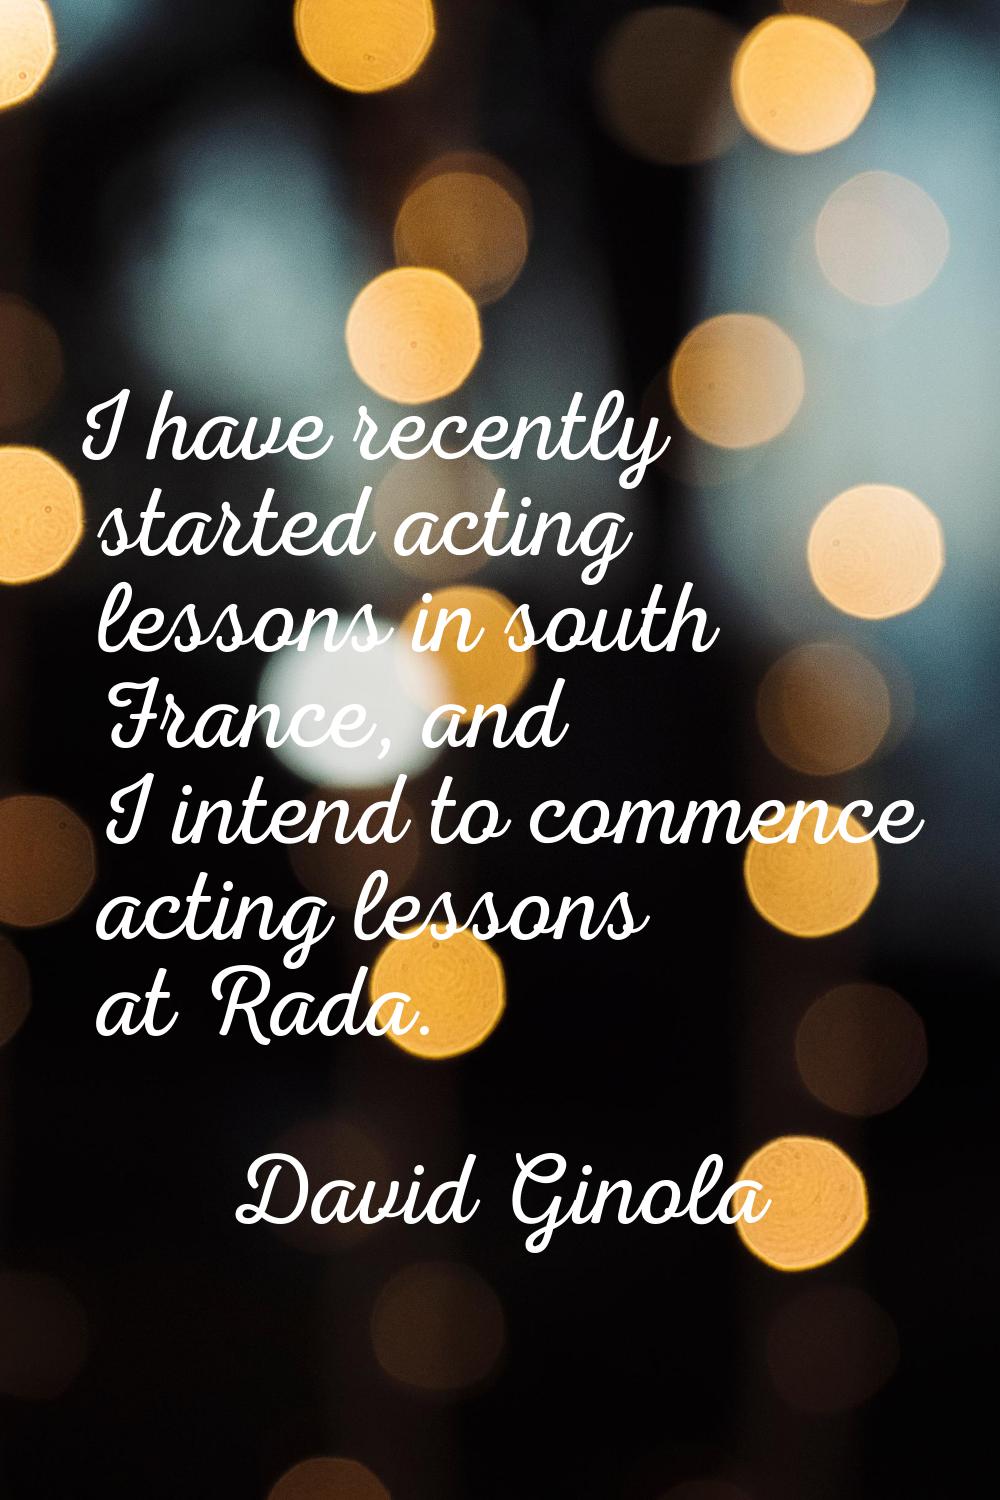 I have recently started acting lessons in south France, and I intend to commence acting lessons at 